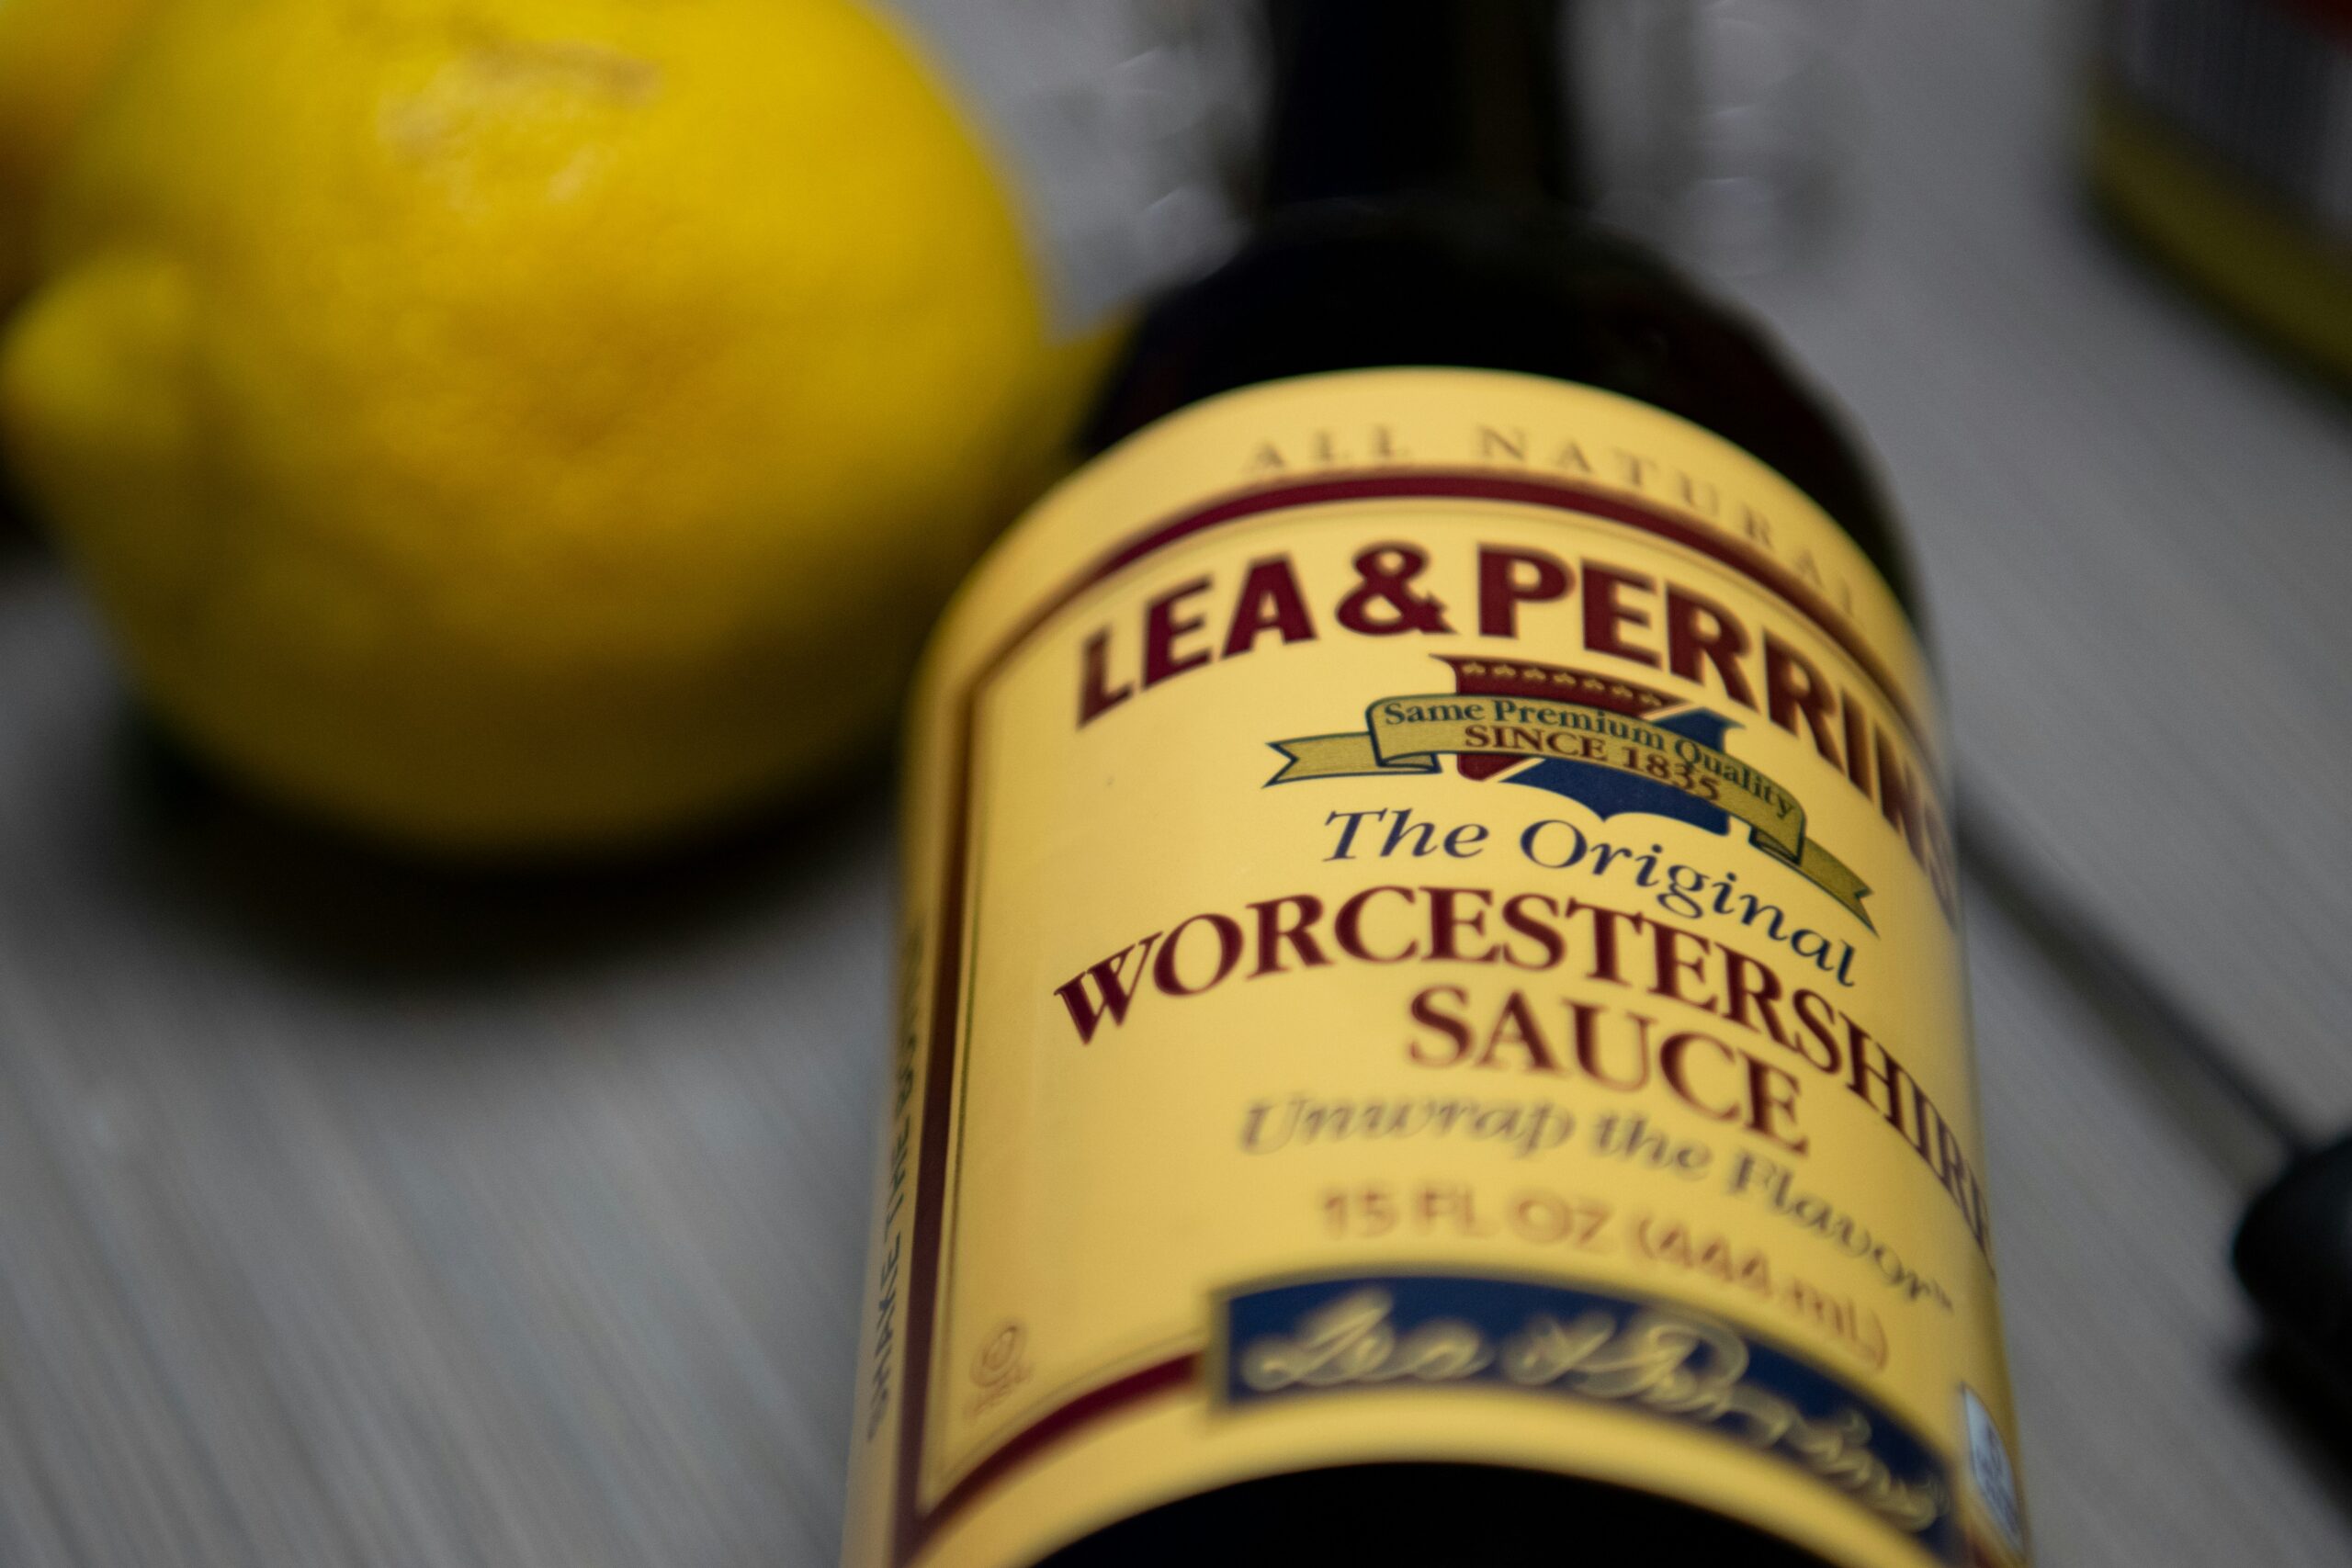 If you don't have any soy sauce in your fridge, pull out Worcestershire sauce for an alternative for soy sauce. Pictured: Worcestershire sauce